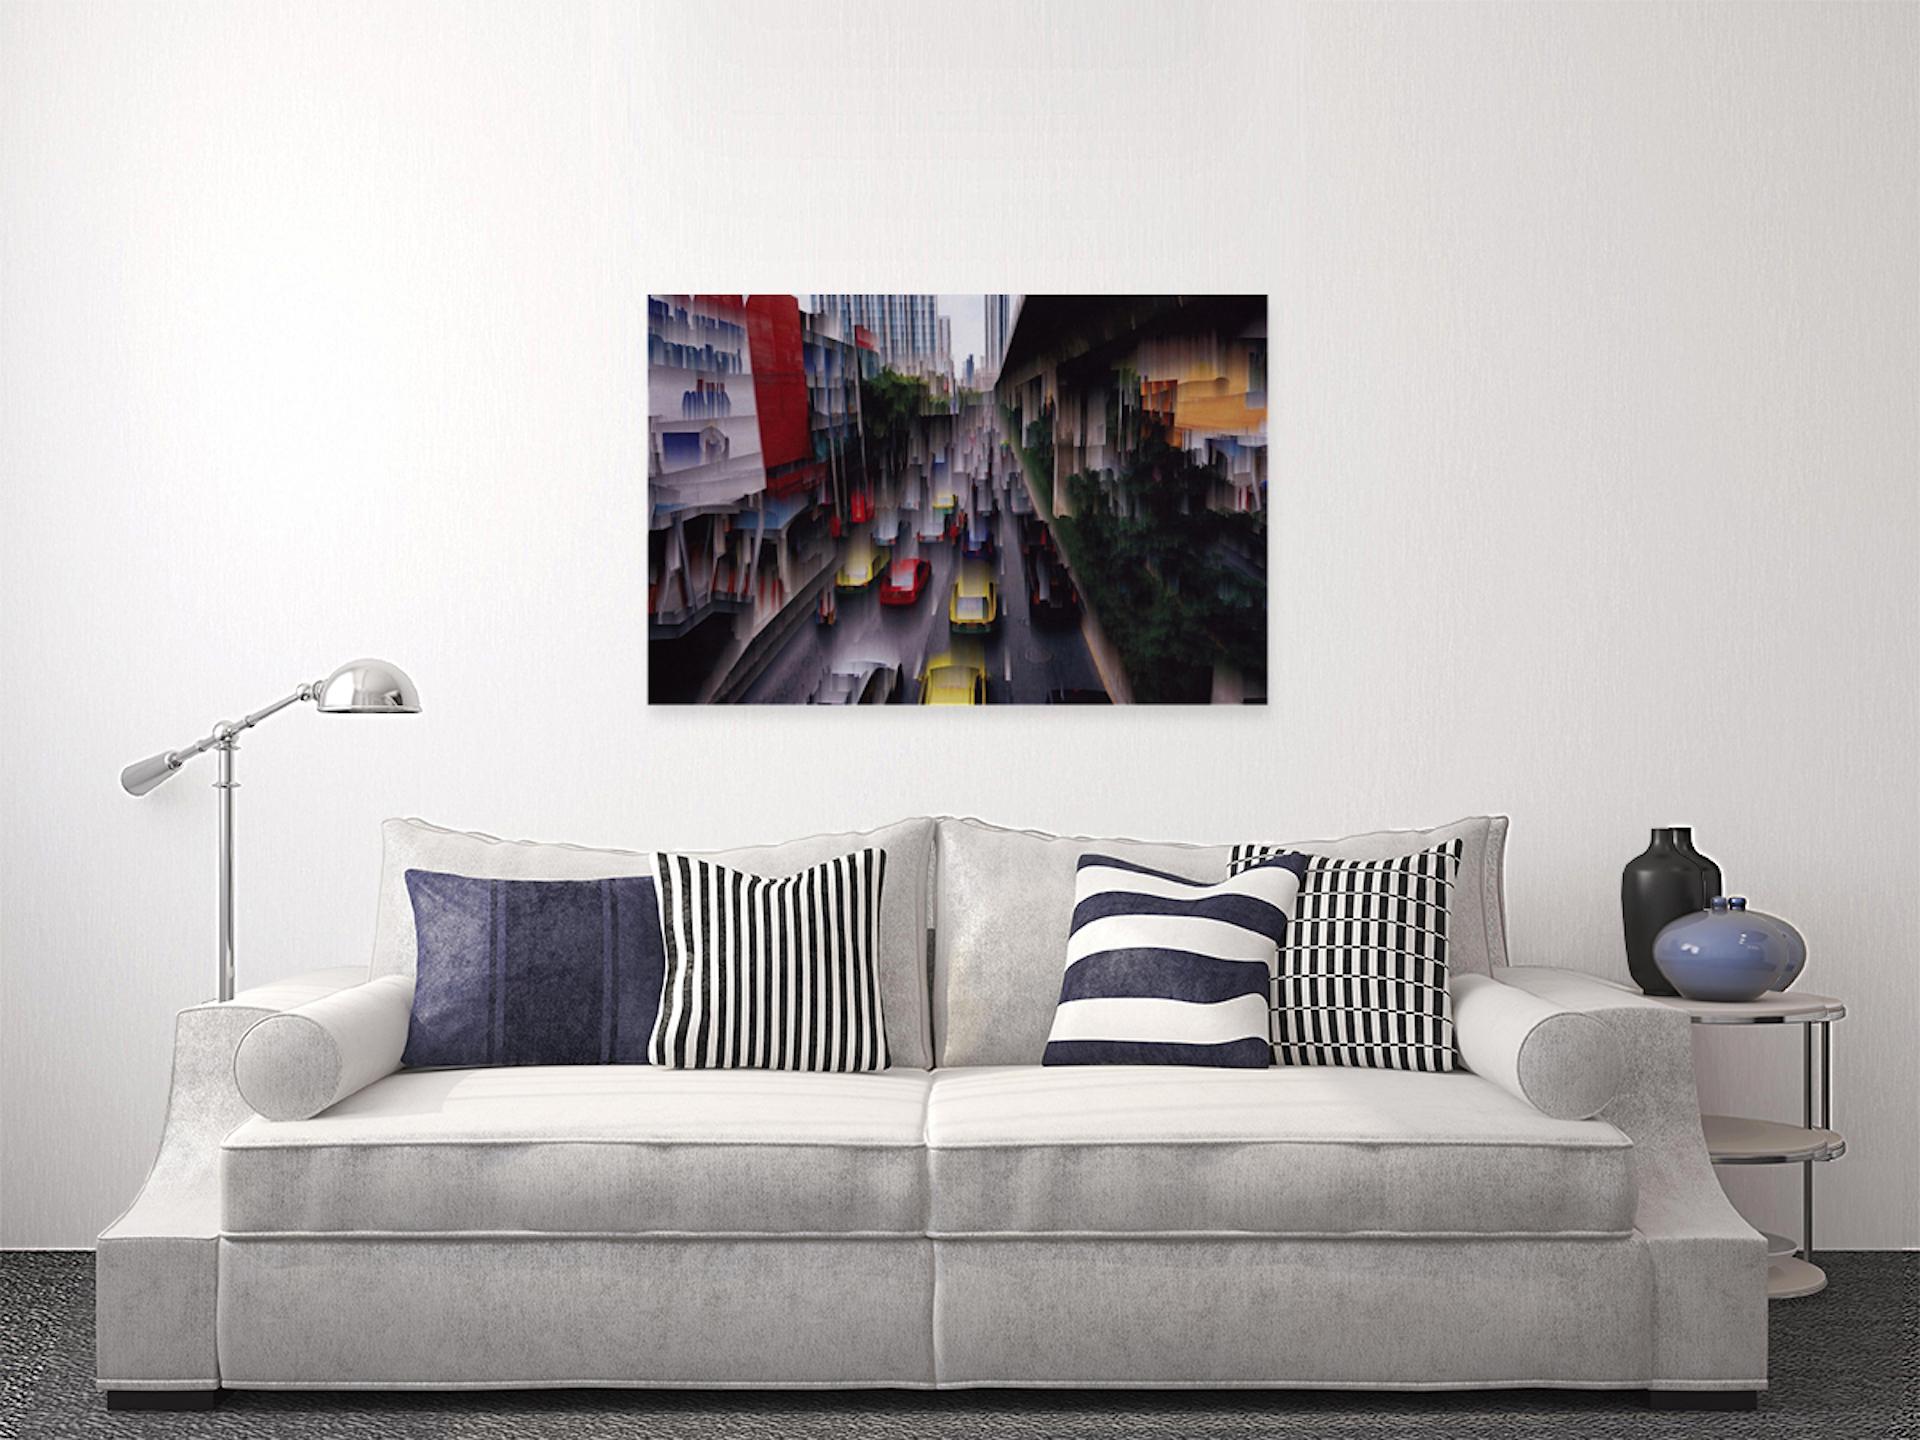 Downtown Bridge BY AGENT X, Limited Edition Art, Contemporary Abstract Cityscape im Angebot 6